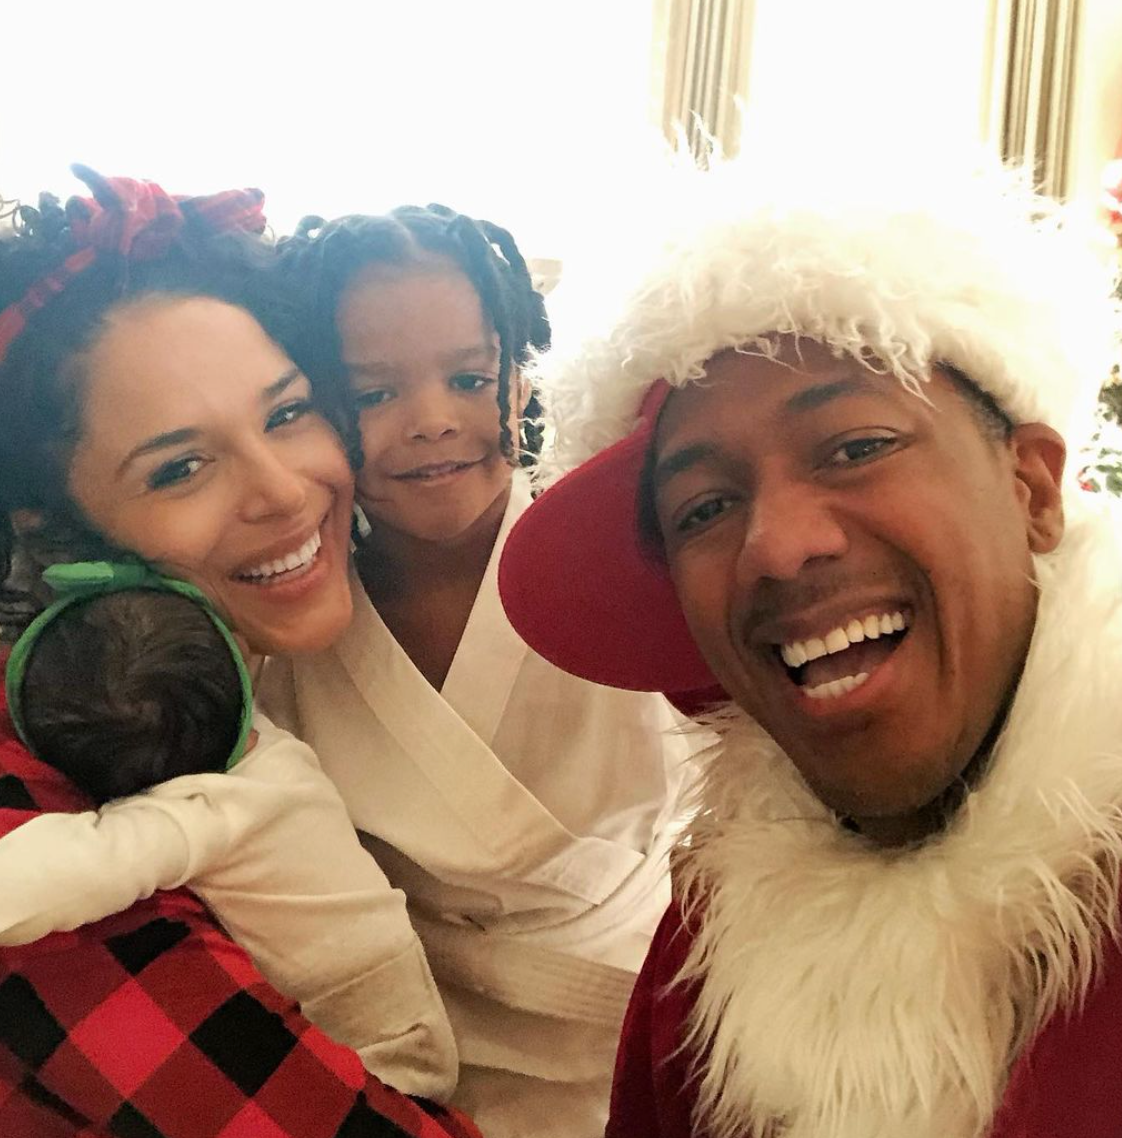 Here's How Our Favorite Celebrities Spent The Holidays